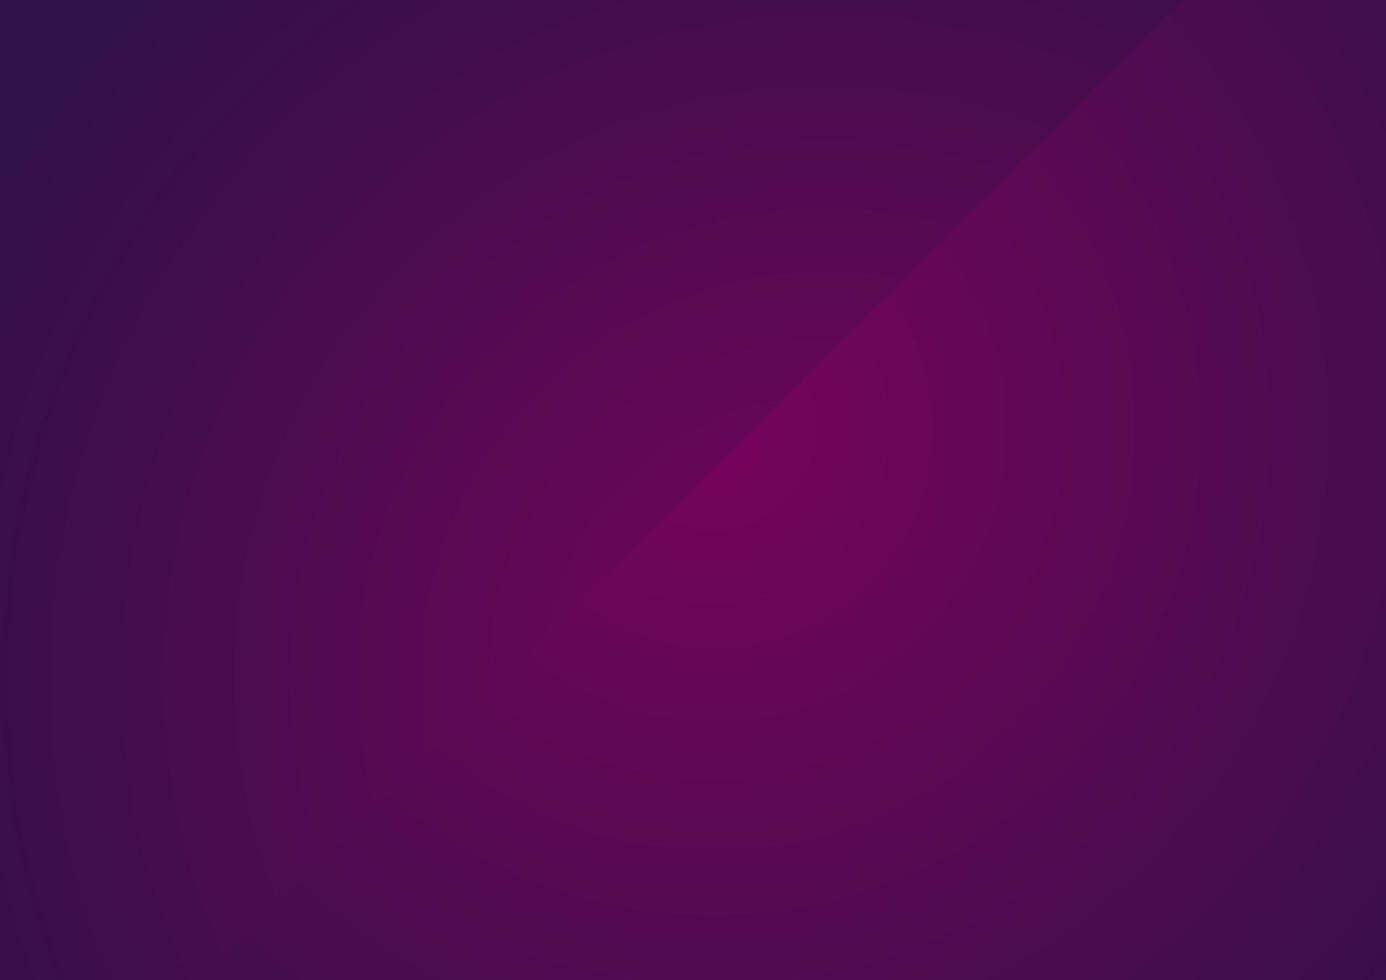 Abstract minimal elegant pink and purple gradient crease diagonal line background vector